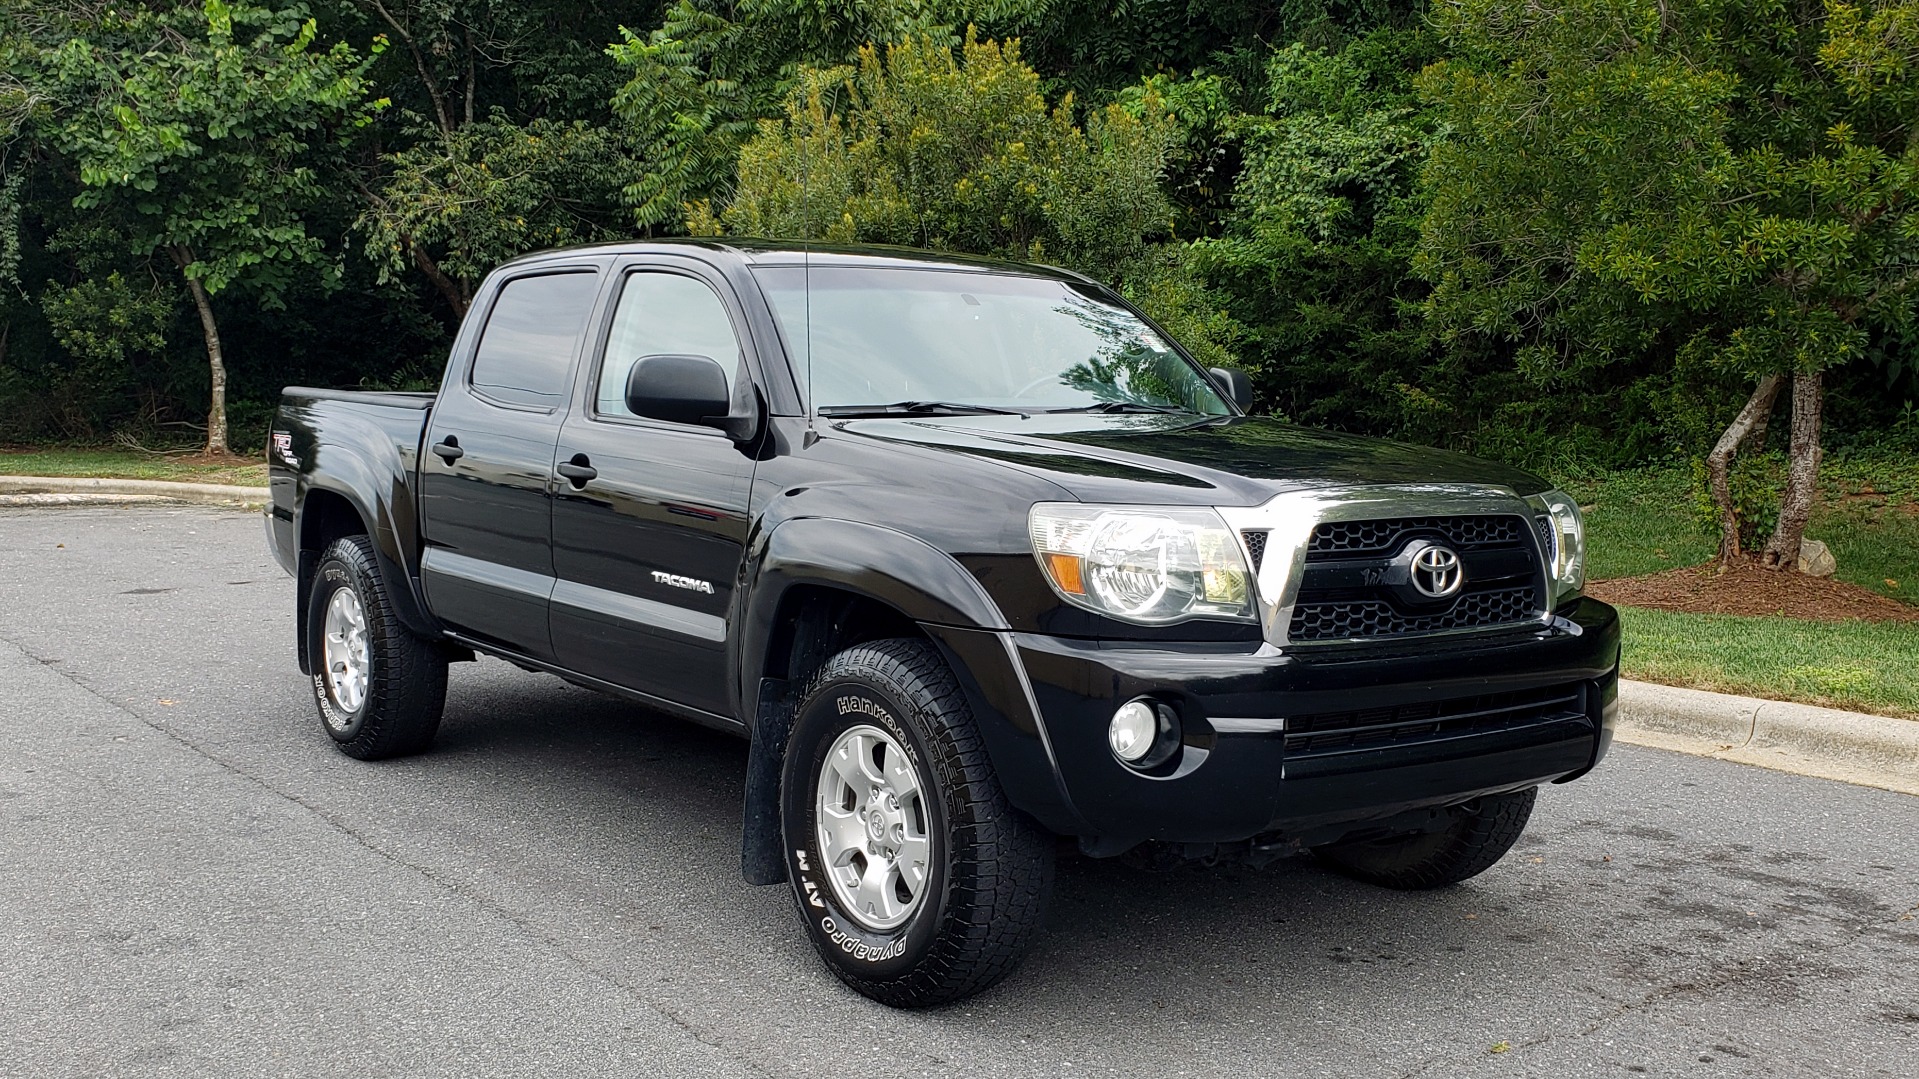 Used 2011 Toyota TACOMA 4WD / 4.0L V6 / 5-SPD AUTO / TRD OFF-ROAD PKG / BED LINER for sale Sold at Formula Imports in Charlotte NC 28227 4